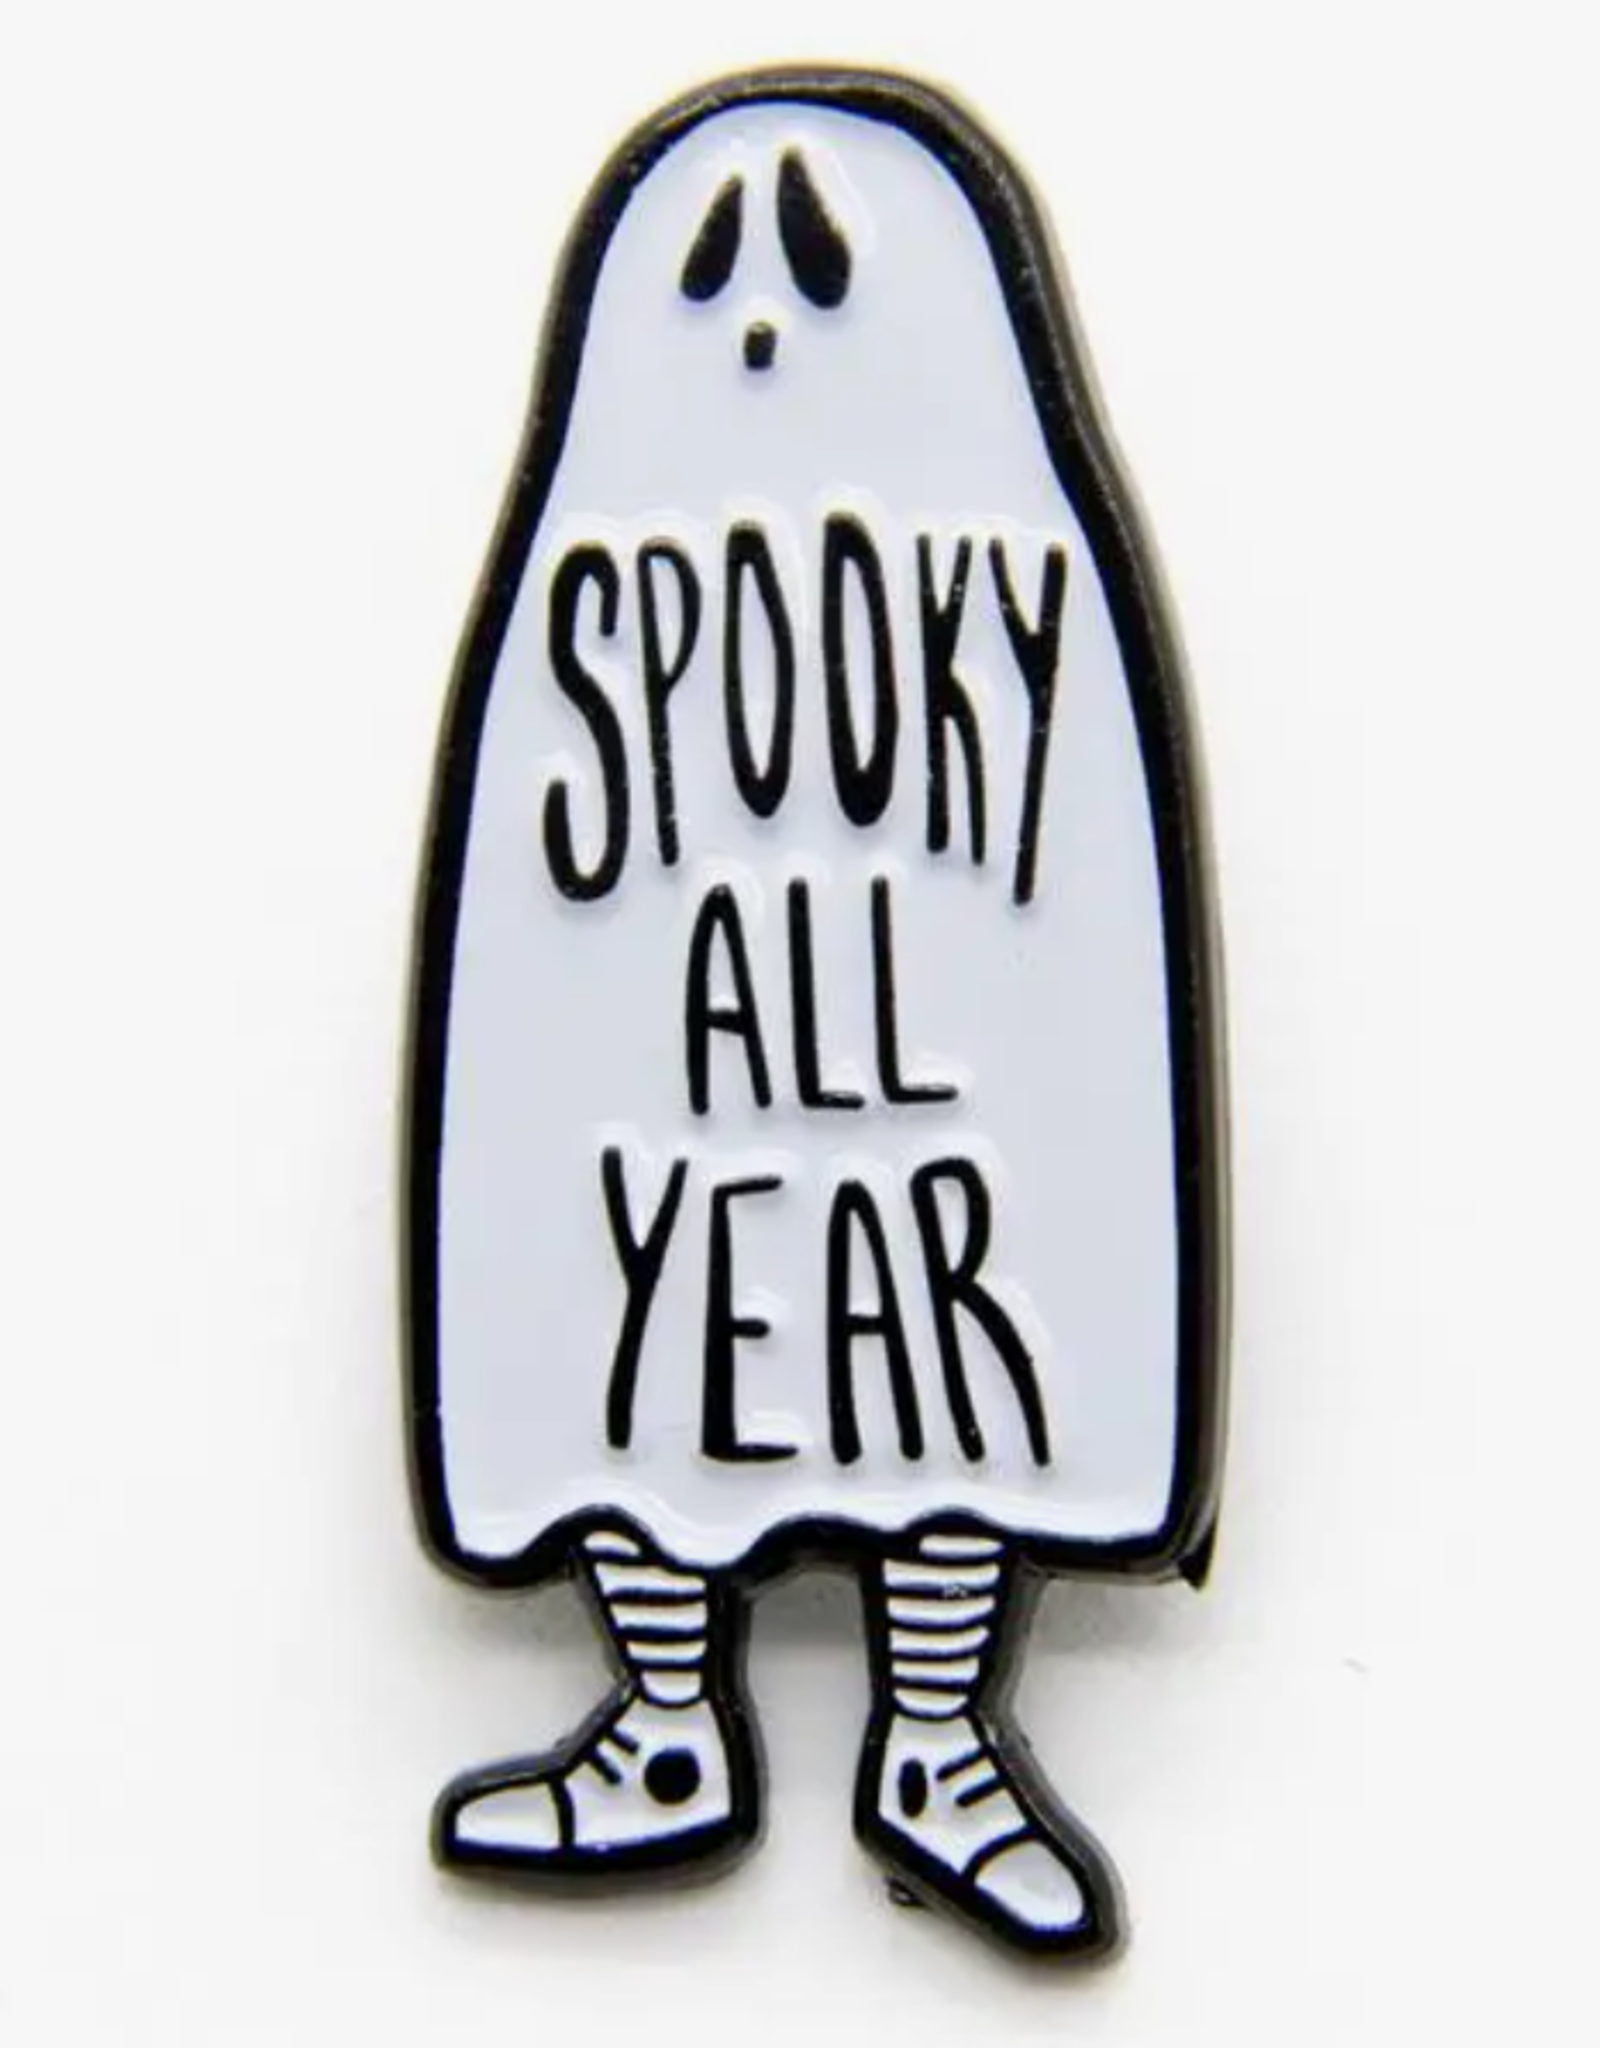 Spooky All Year Ghost Enamel Pin for Halloween